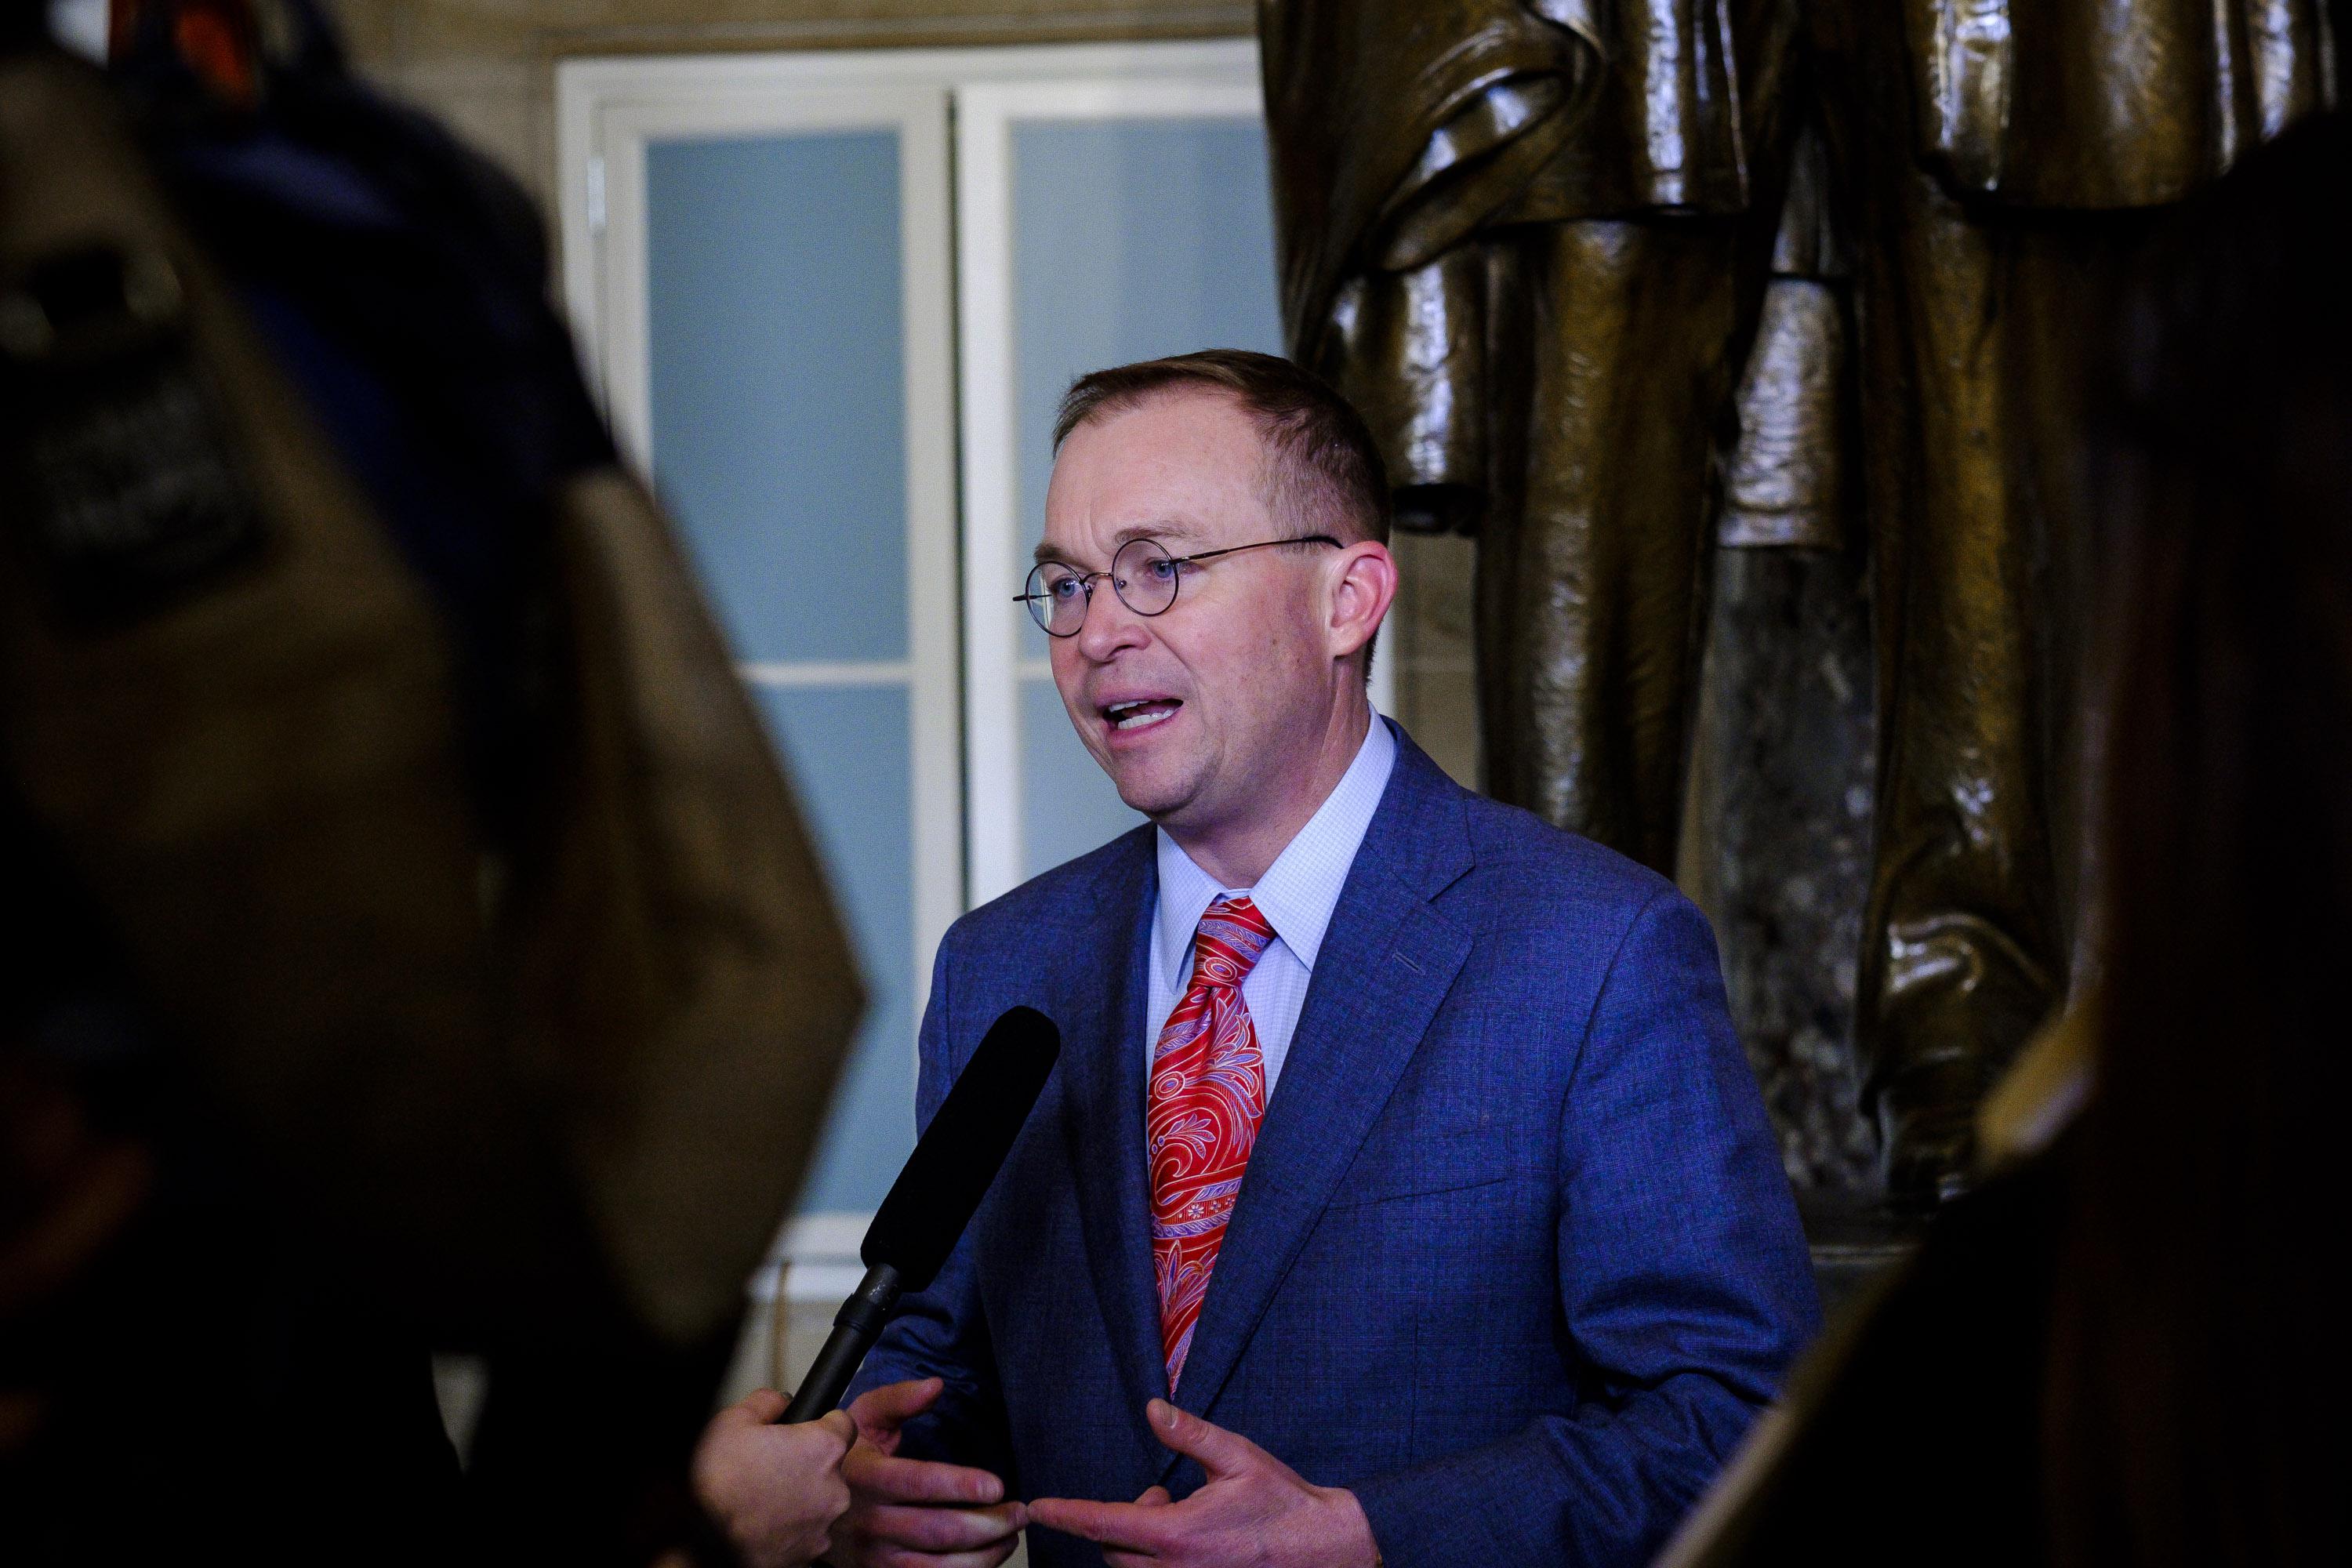 WASHINGTON, DC - JANUARY 30:  President Trump's Budget Director, Mick Mulvaney, is interviewed in Statuary Hall at the US Capitol before President Donald Trump's first State of the Union Address before a joint session of Congress on January 30, 2018 in Washington, DC.  (Photo by Pete Marovich/Getty Images)